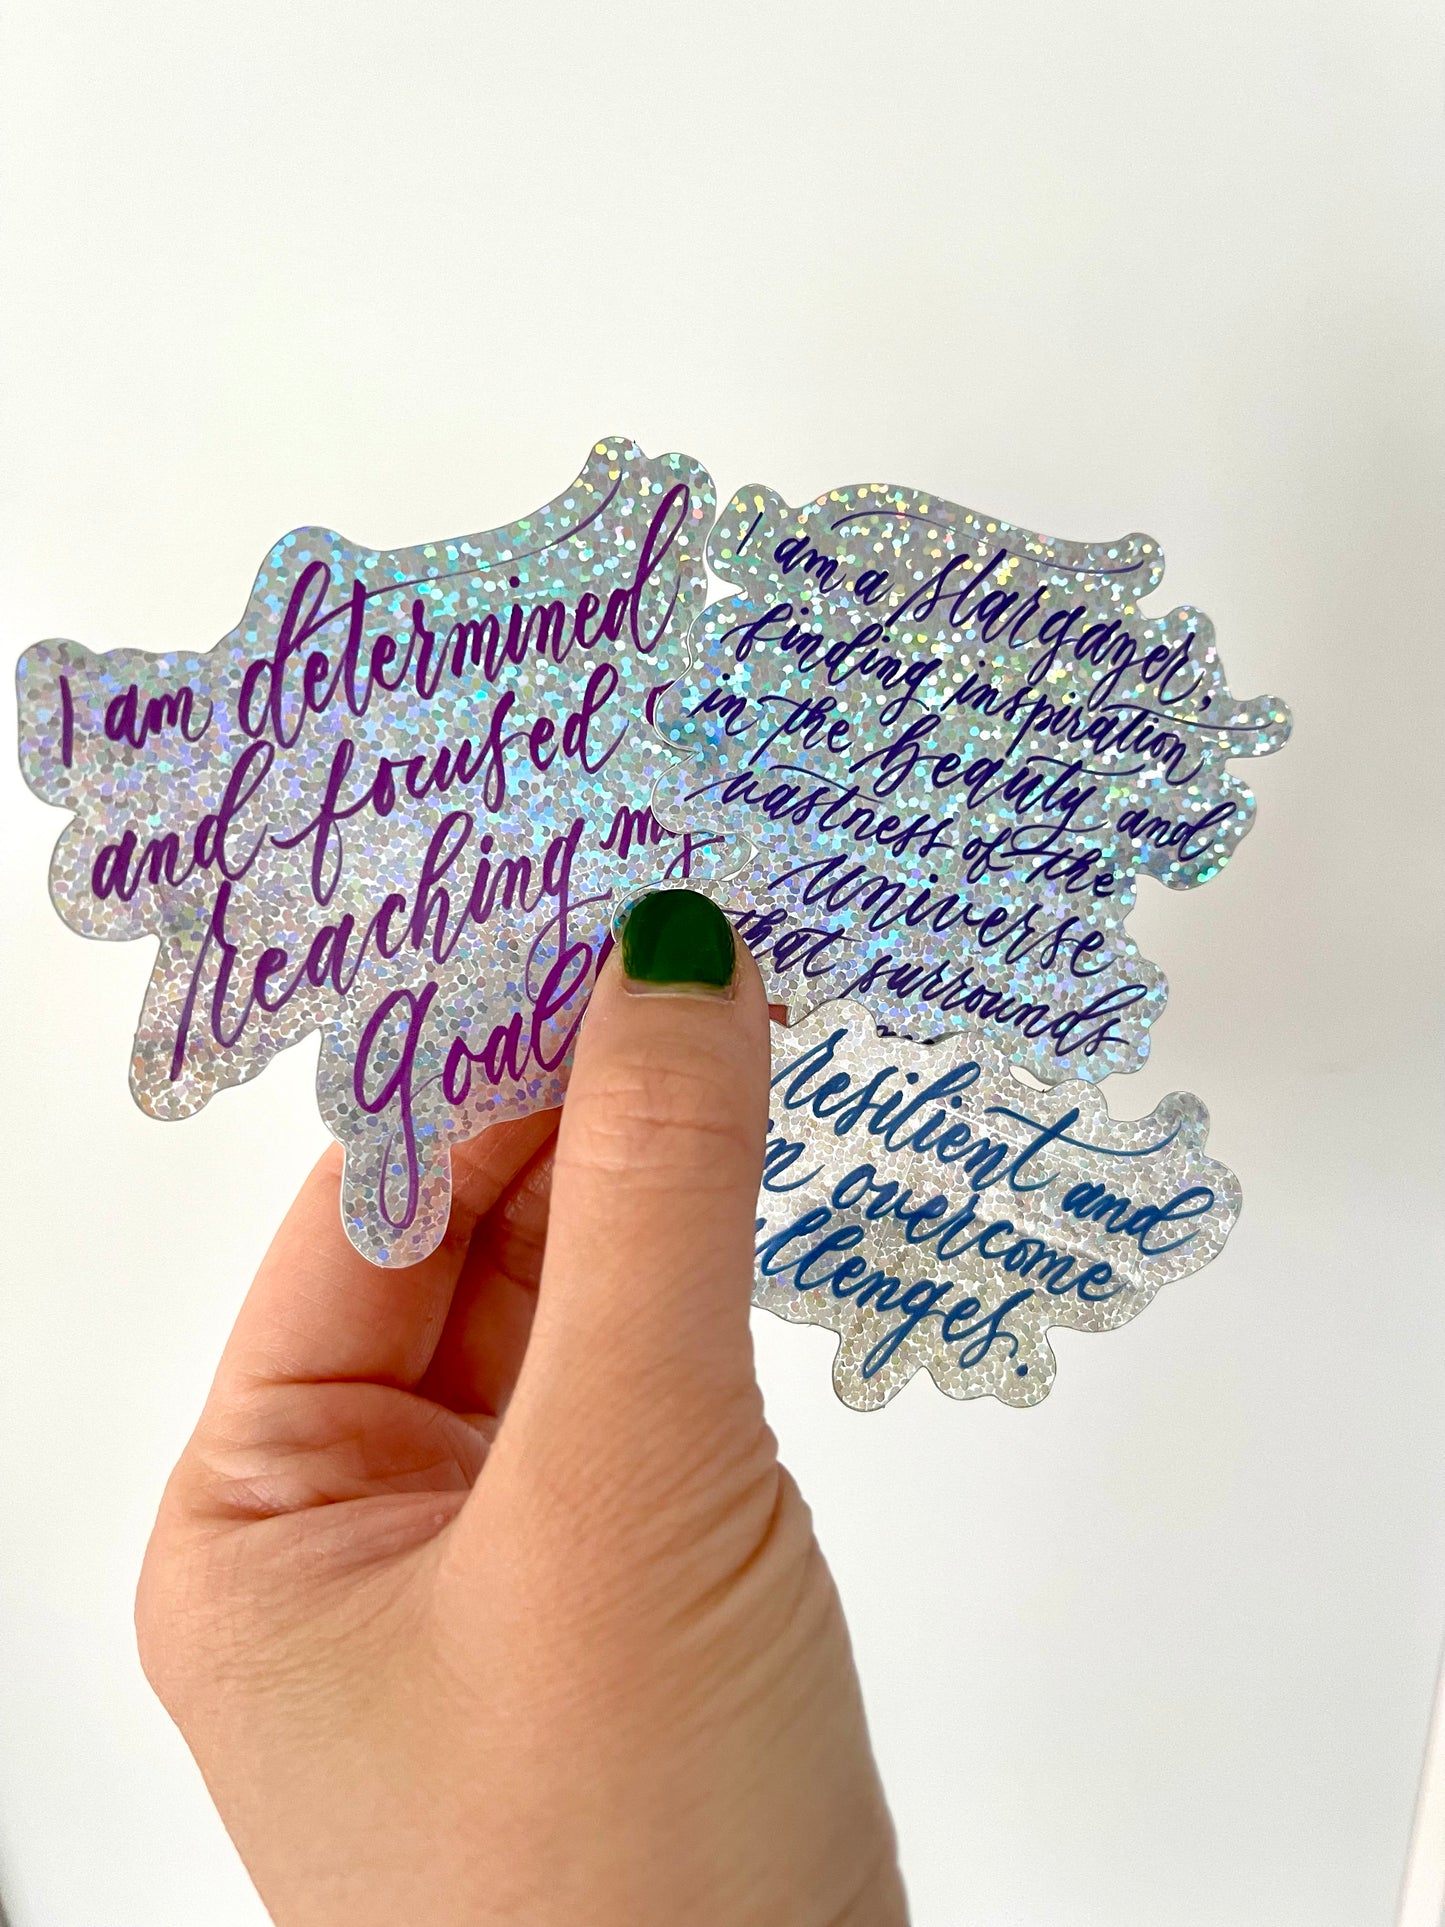 Glitter Sticker Gift Pack "I am... Empowered" Calligraphy Quote Vinyl Decal Stickers Set of 3 - I am Empowered #01, #05, #06